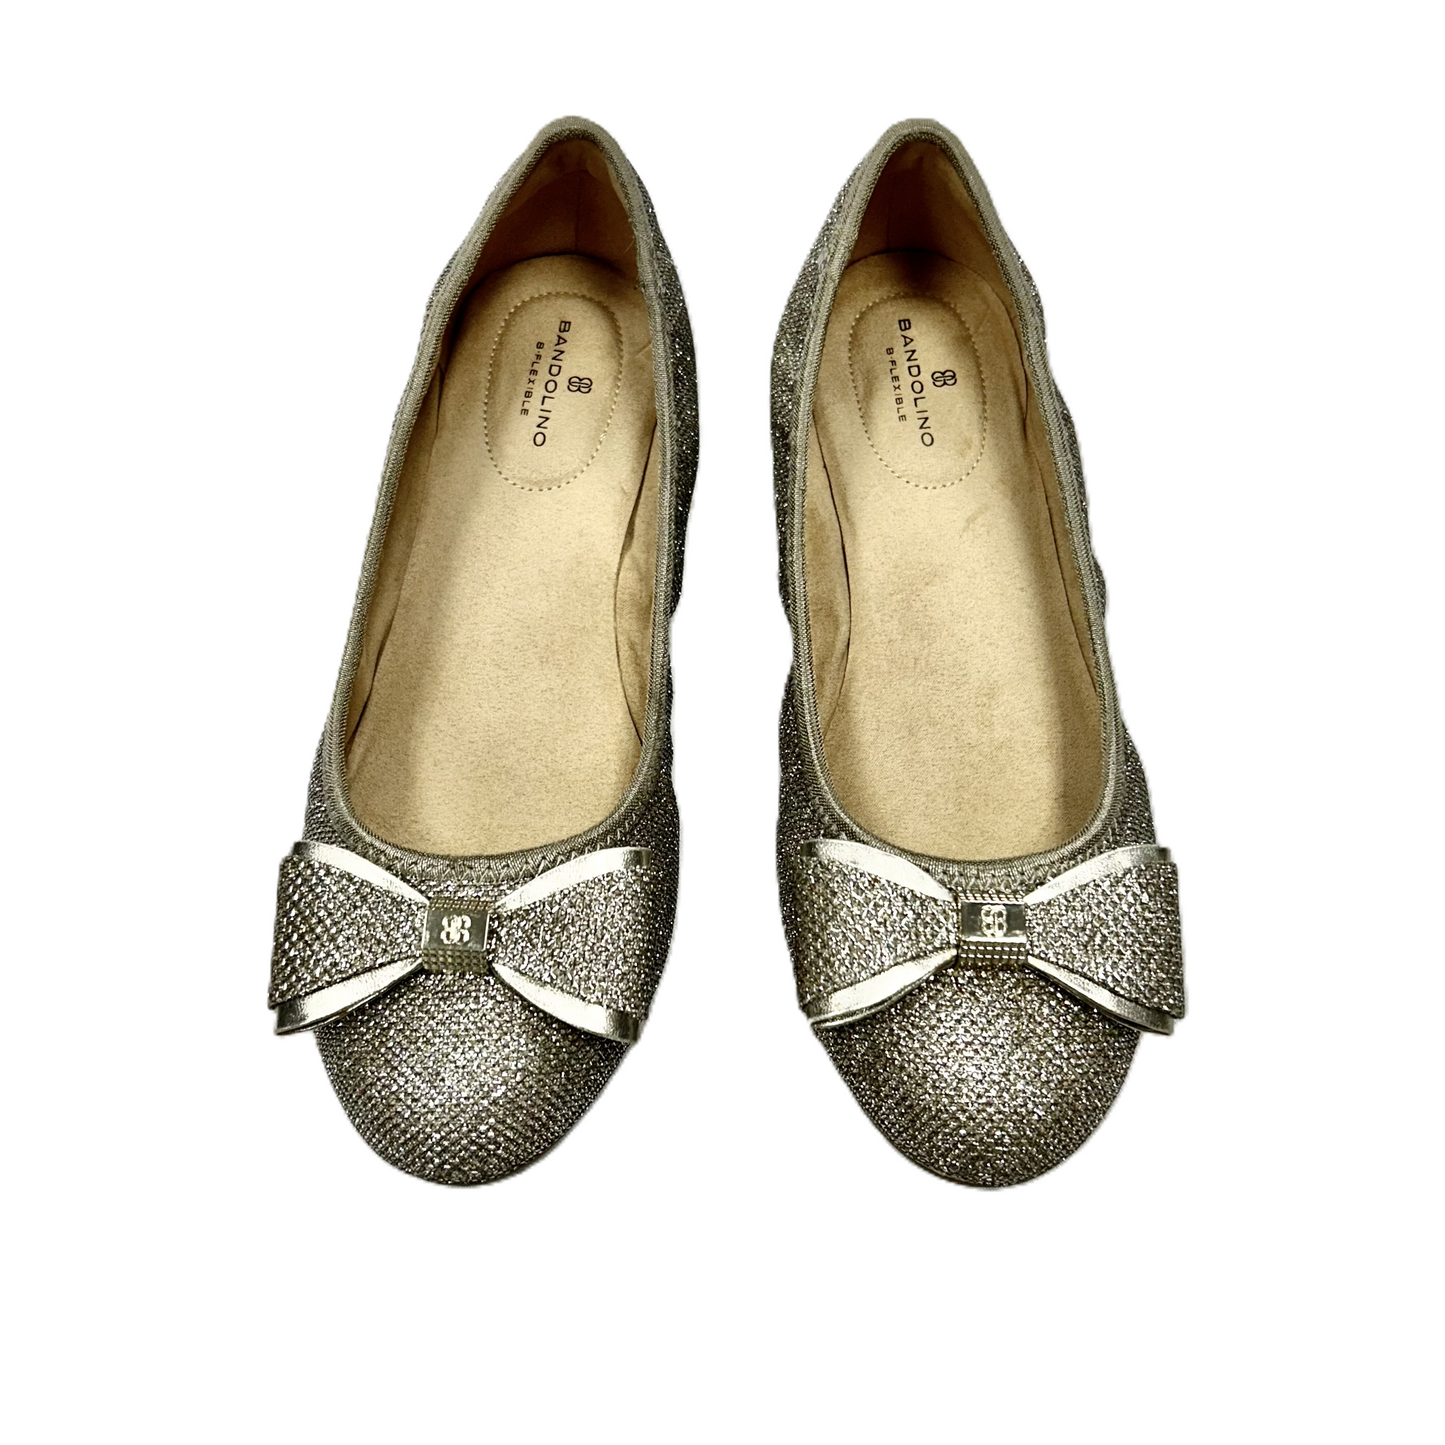 Gold Shoes Flats By Bandolino, Size: 8